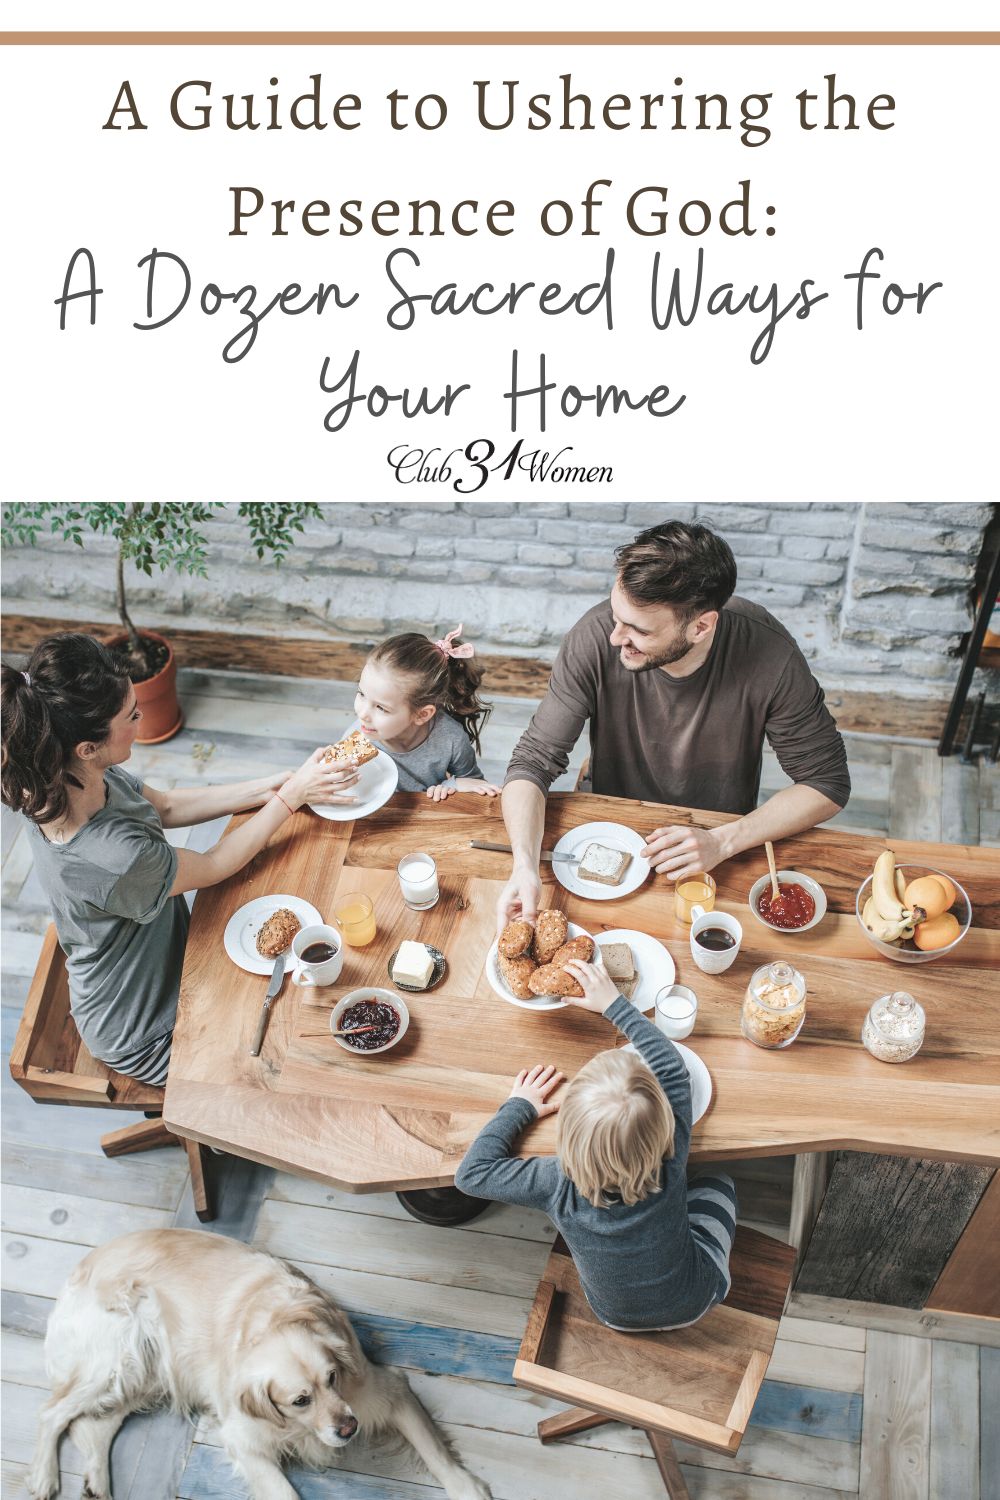 There are sacred ways you can invite the Holy Spirit to dwell in your home by dwelling in the hearts of you and your family. via @Club31Women